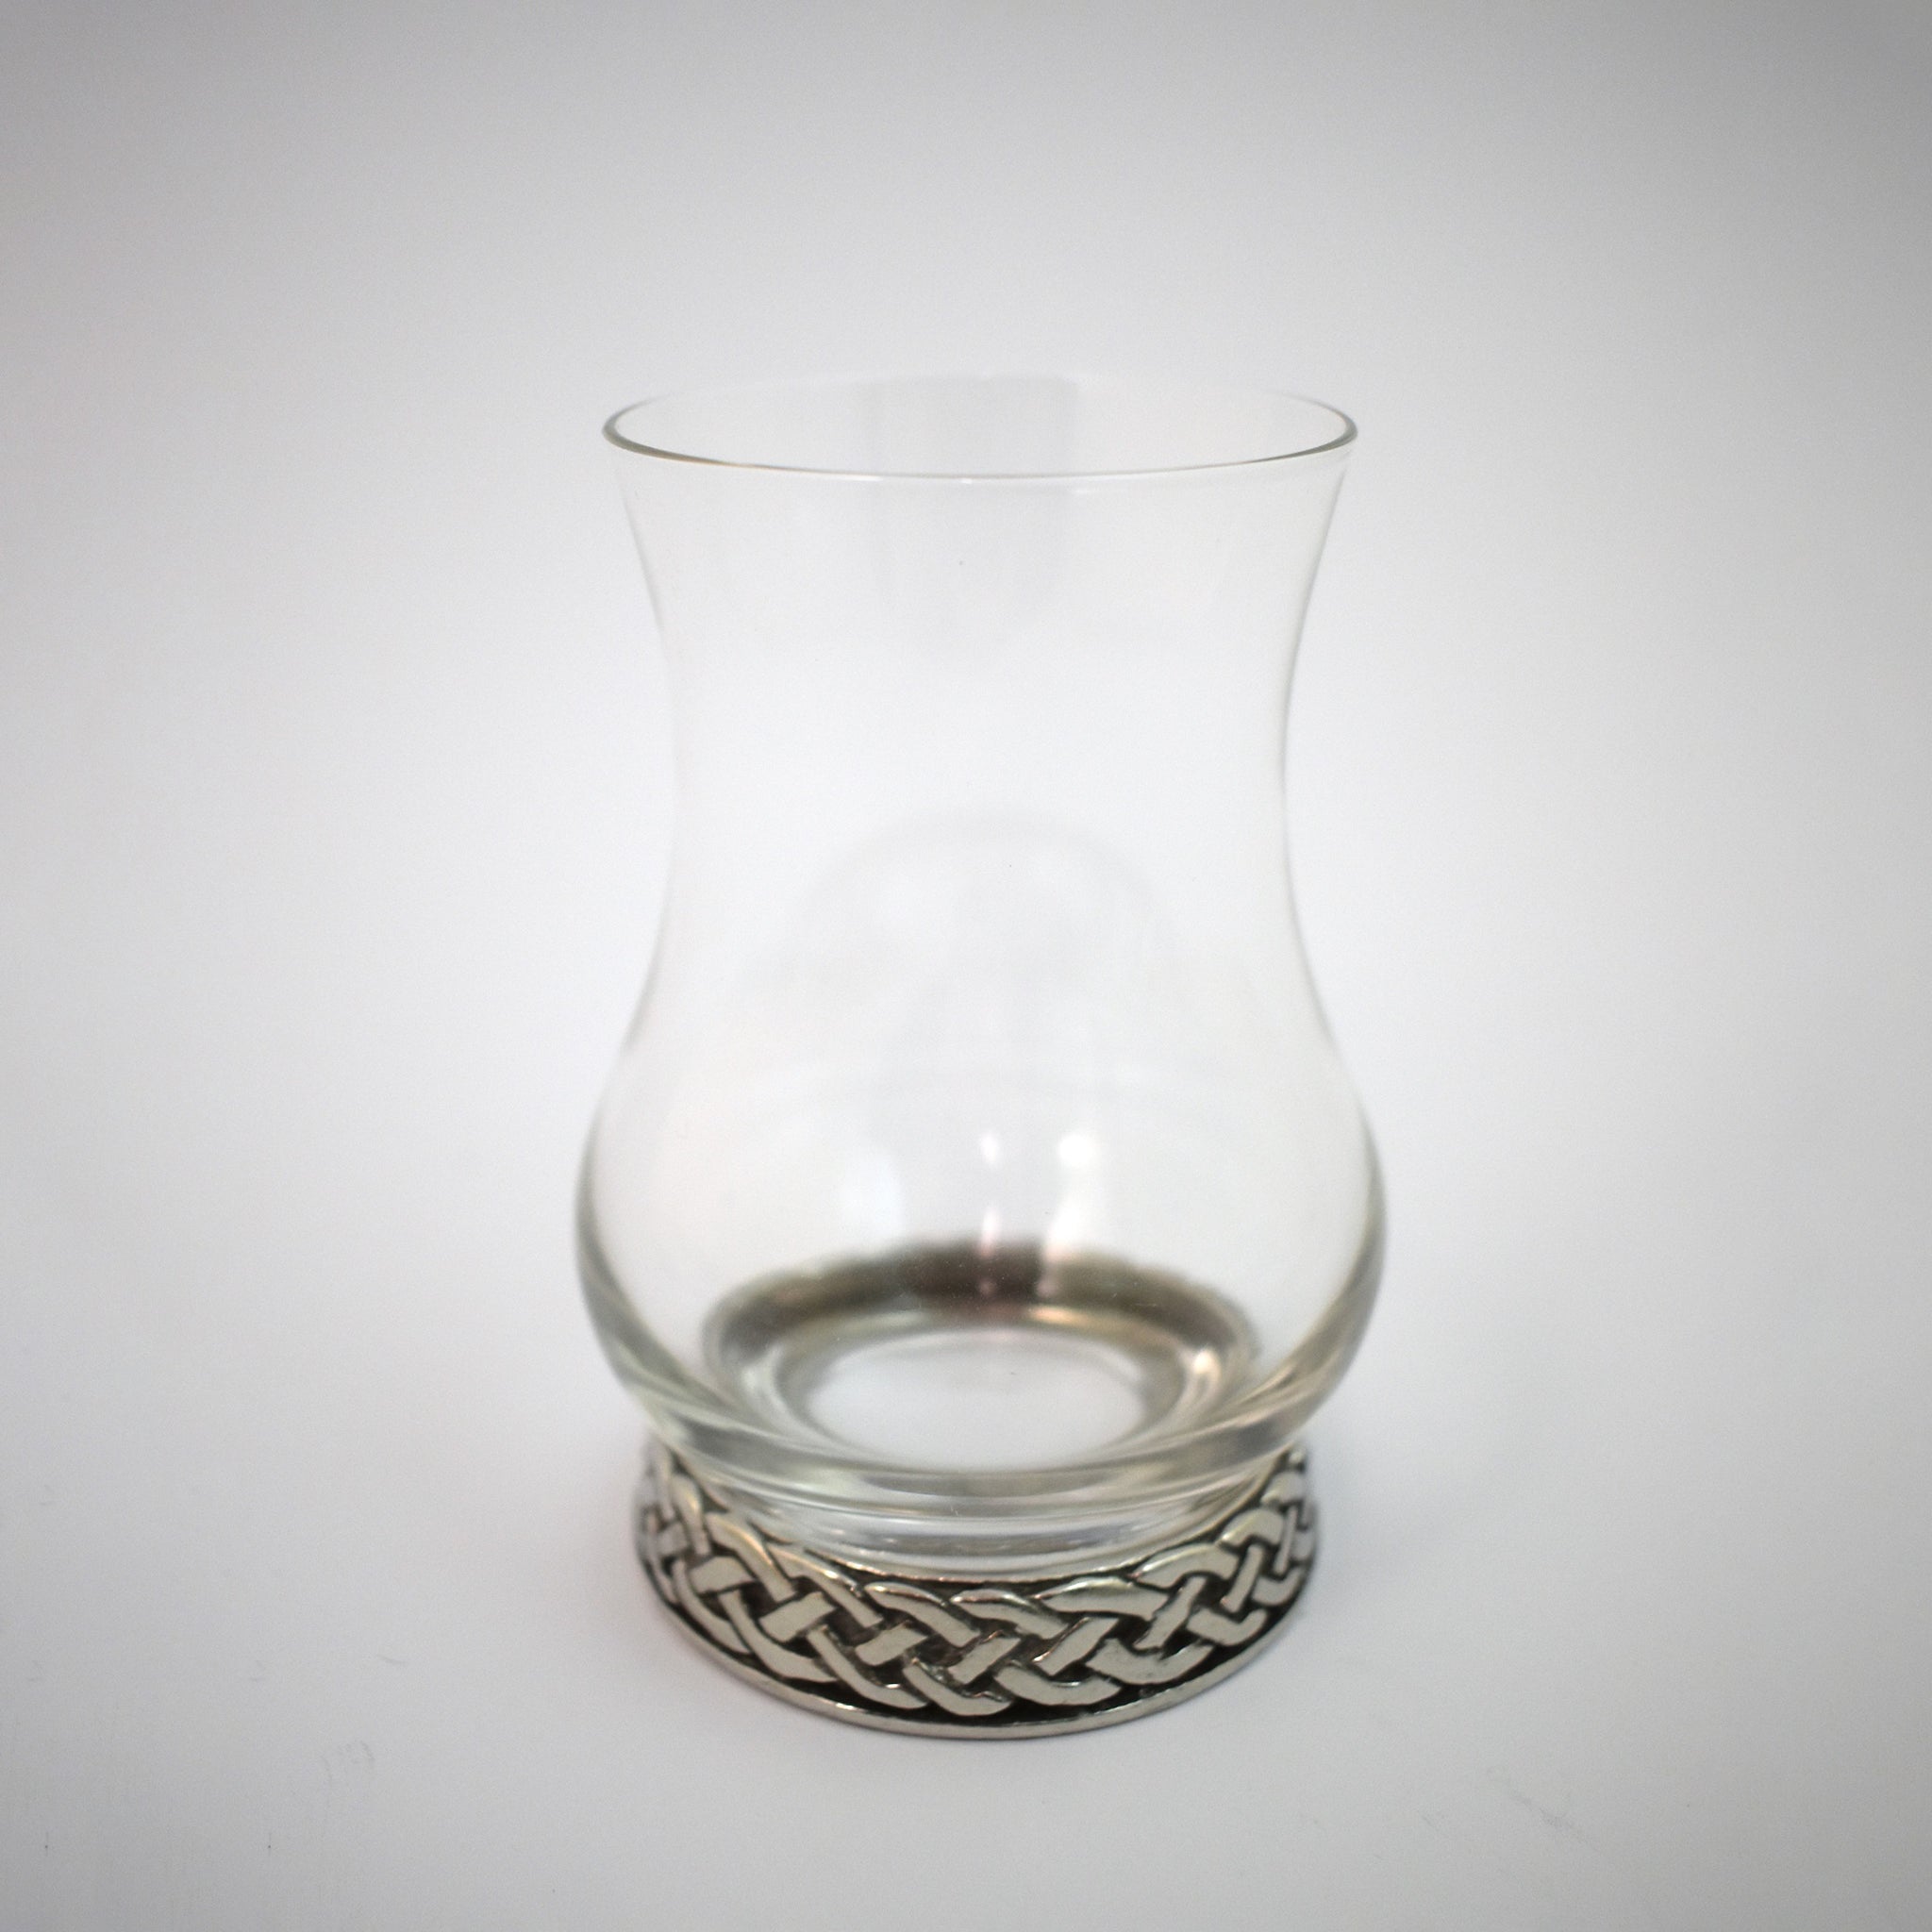 A whisky glass with pewter base engraved with a celtic knot